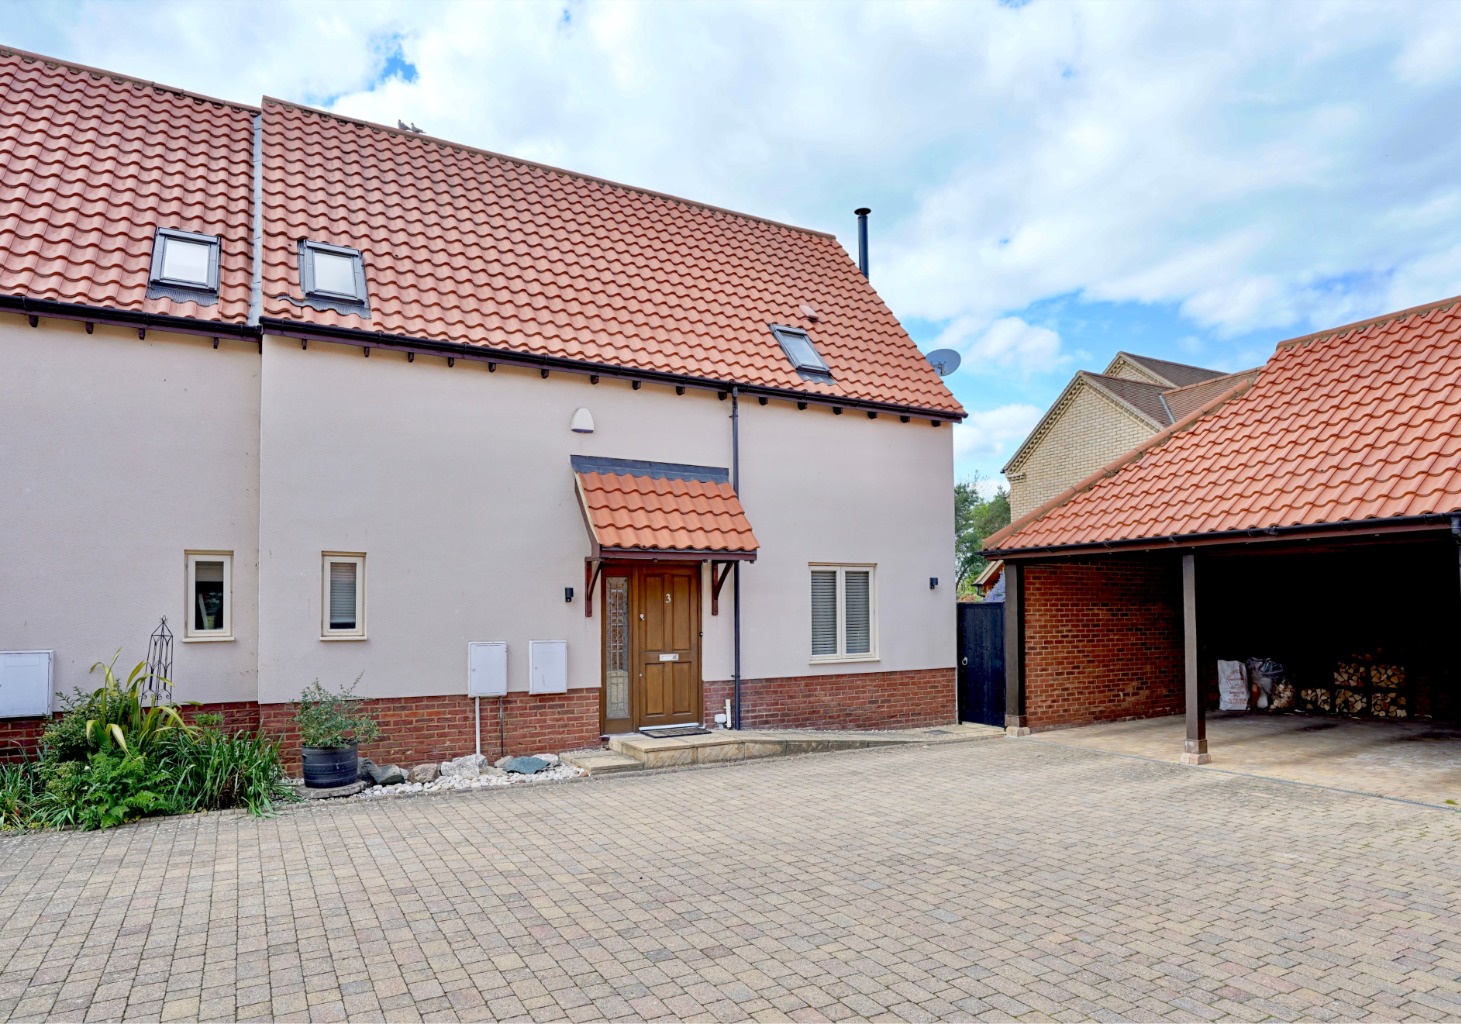 **SET IN QUIET AND SOUGHT AFTER DEVELOPMENT** SET ADJACENT TO ST NEOTS GOLF COURSE**TWO DOUBLE BEDROOMS** EN-SUITE SHOWER ROOM** WRAP AROUND GARDEN AND CAR PORT** EASY ACCESS TO A1** WALKING DISTANCE TO TOWN CENTRE** CROSSHALL SCHOOL CATCHMENT** CONTACT US TO ARRANGE YOUR VIEWING